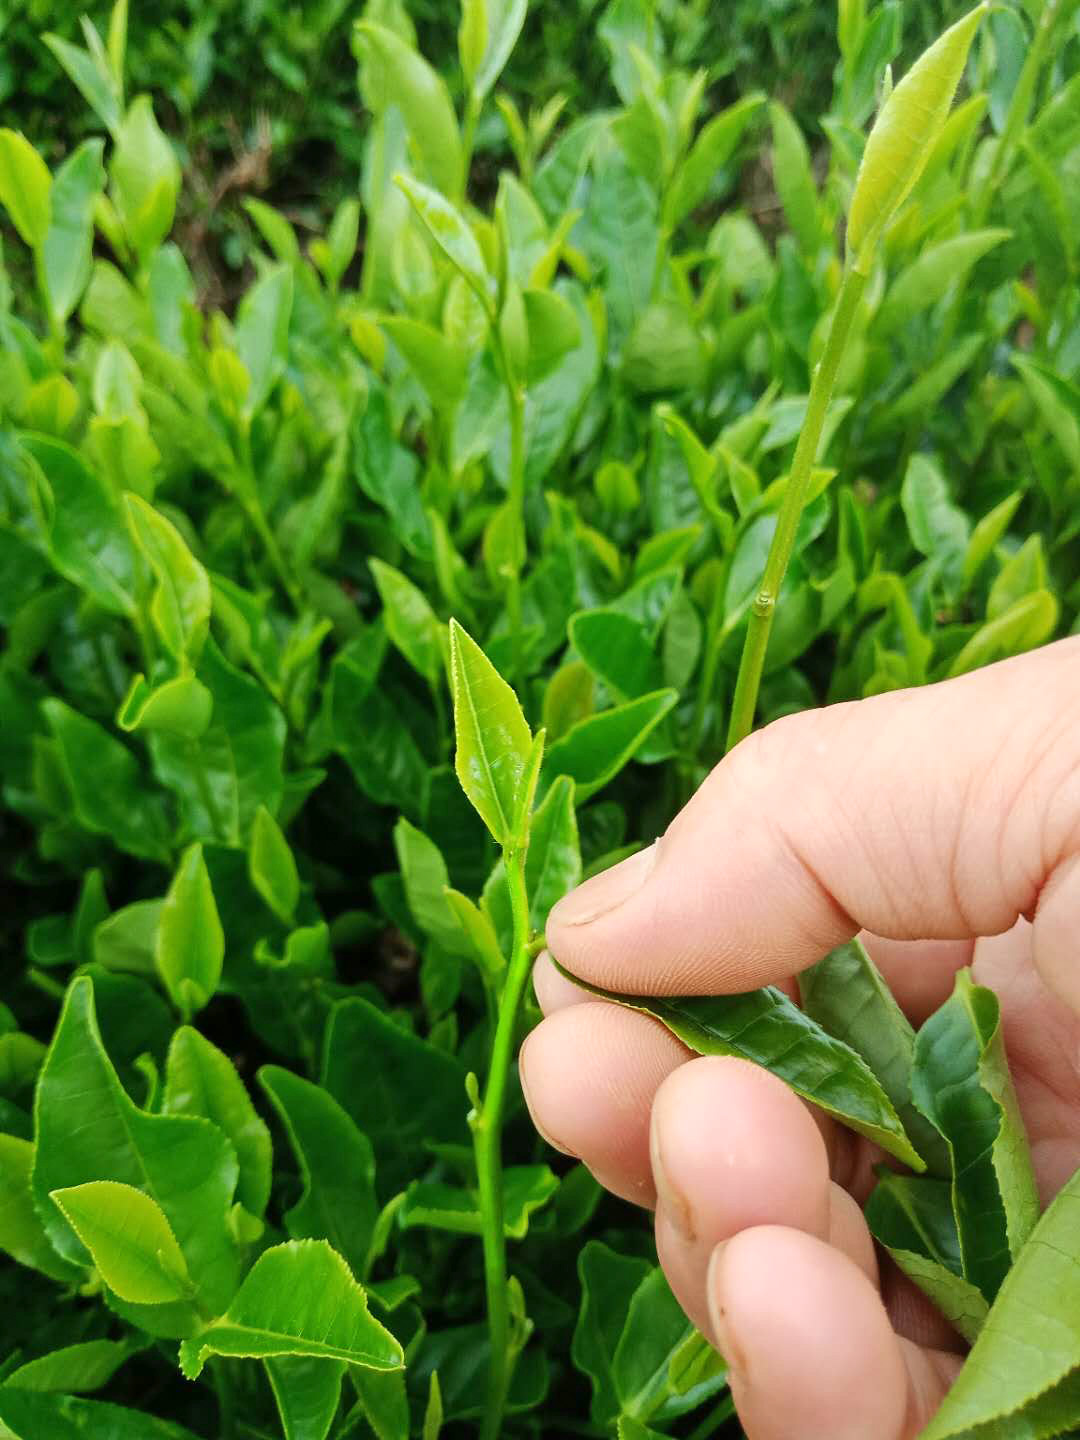  A hand plucking the second leaf on a sprig of young tea, below the bud and first leaf.